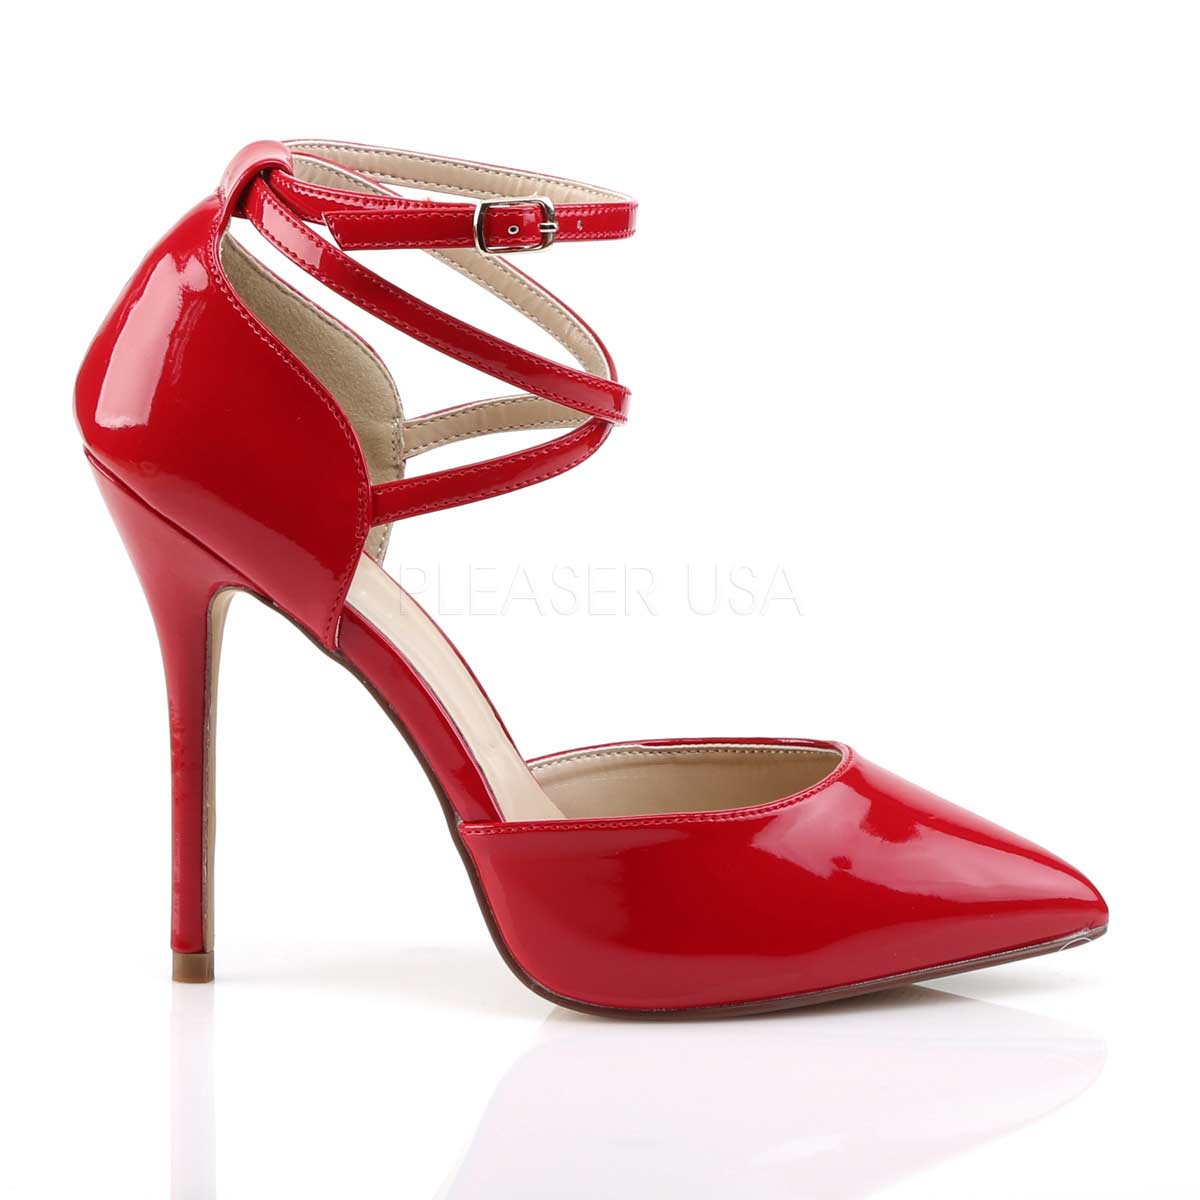 Pleaser Amuse-25 - Red Patent in Sexy Heels & Platforms - $57.95